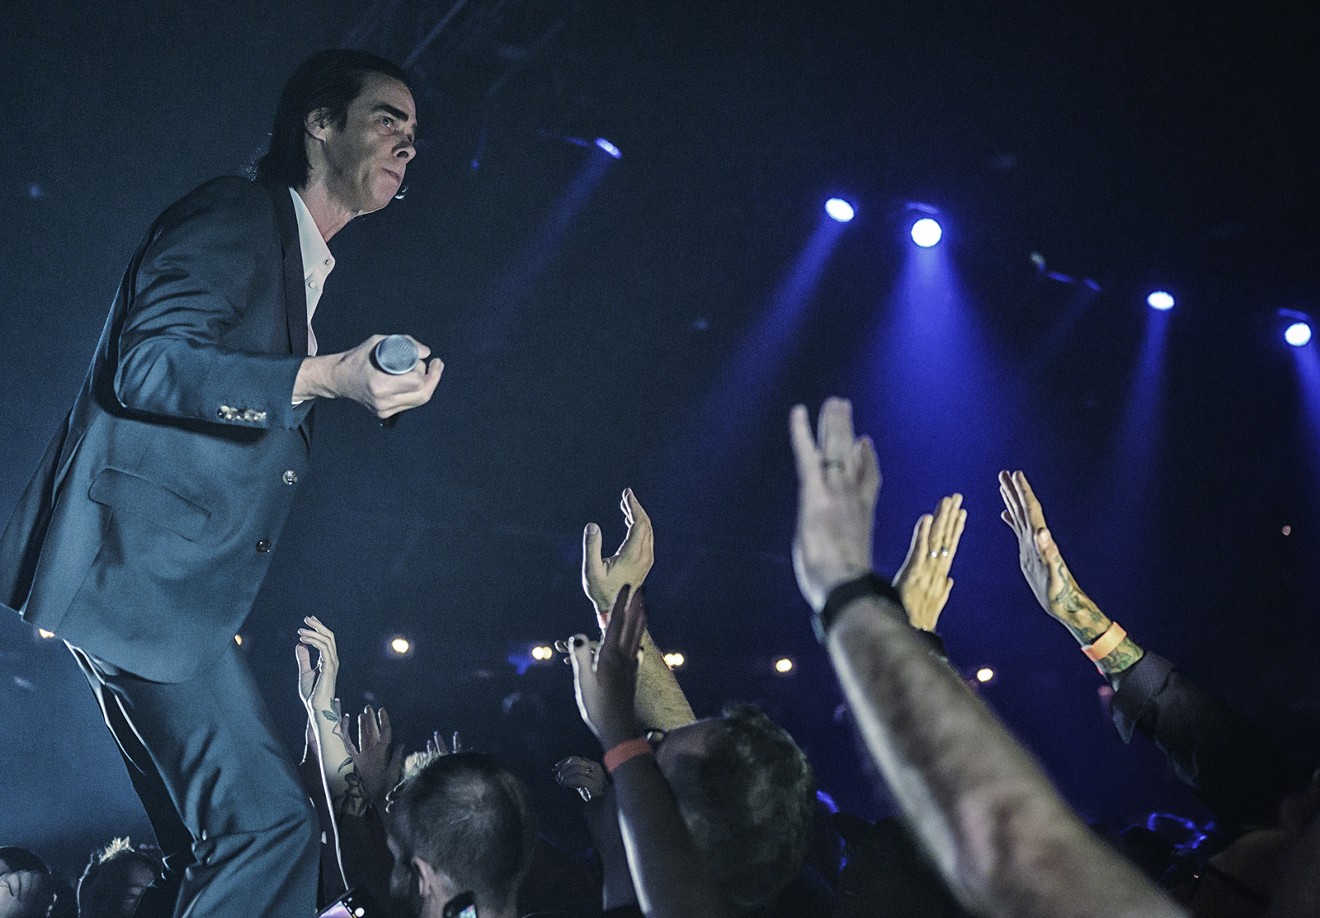 Nick Cave & The Bad Seeds performed Tuesday night at The Bomb Factory.